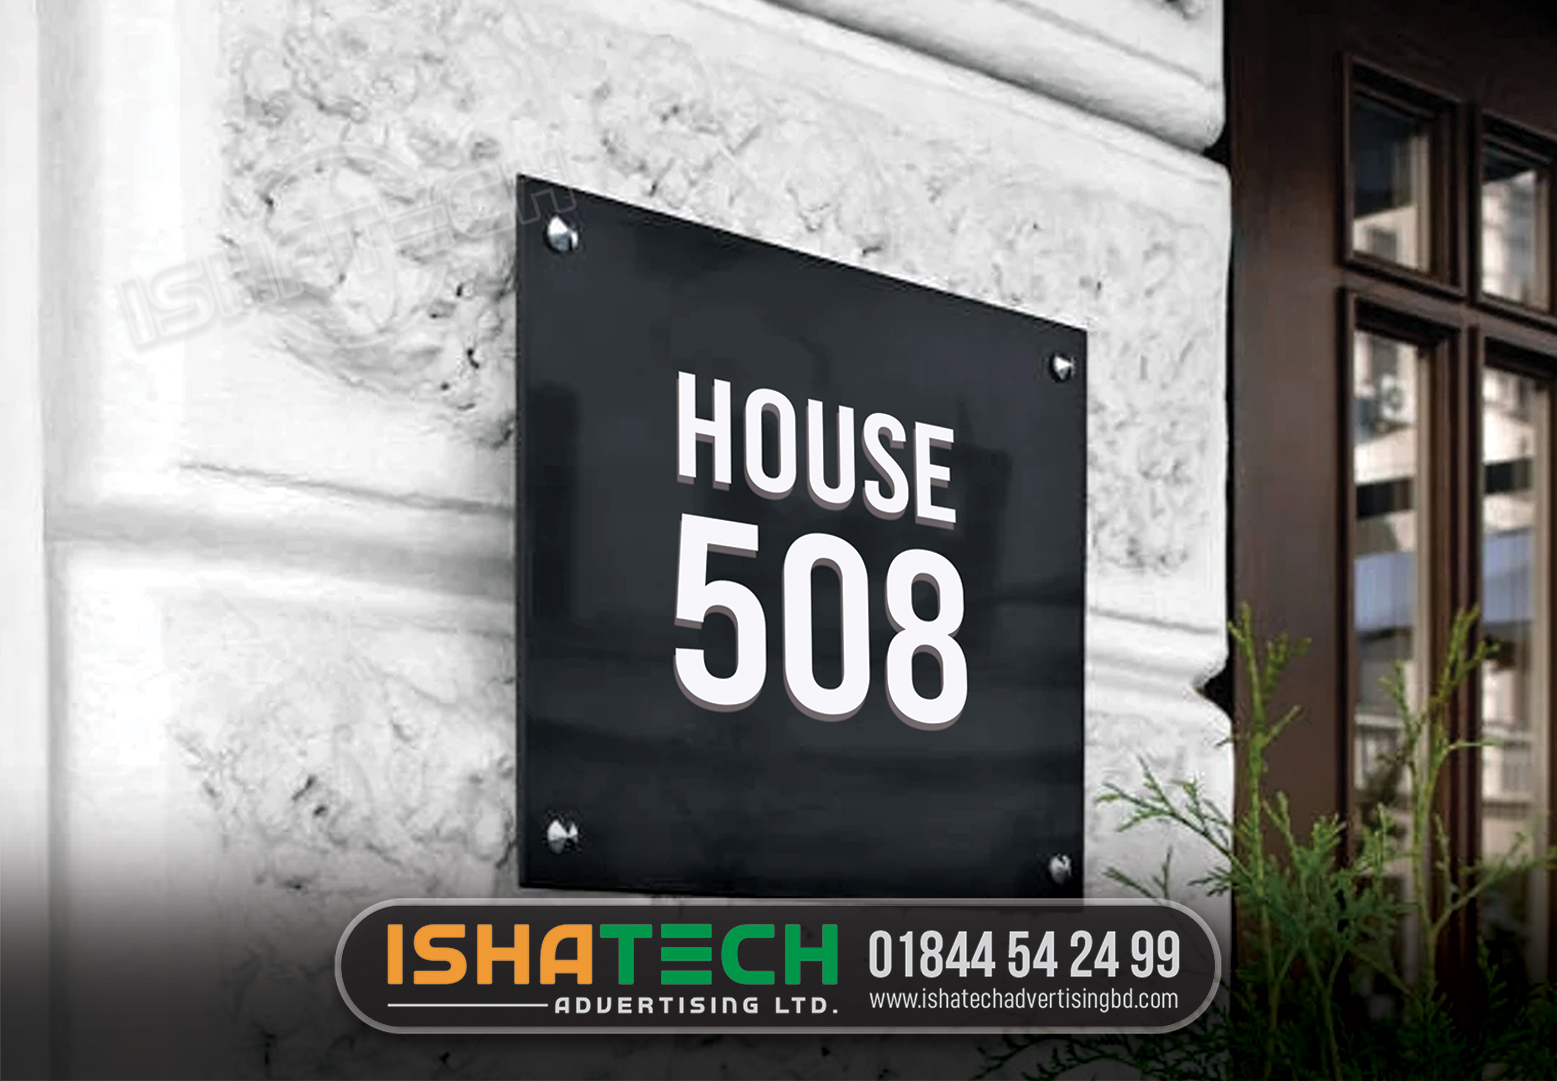 HOUSE 508 NAME PLATE, HOME OUTDOOR NAME PLATE